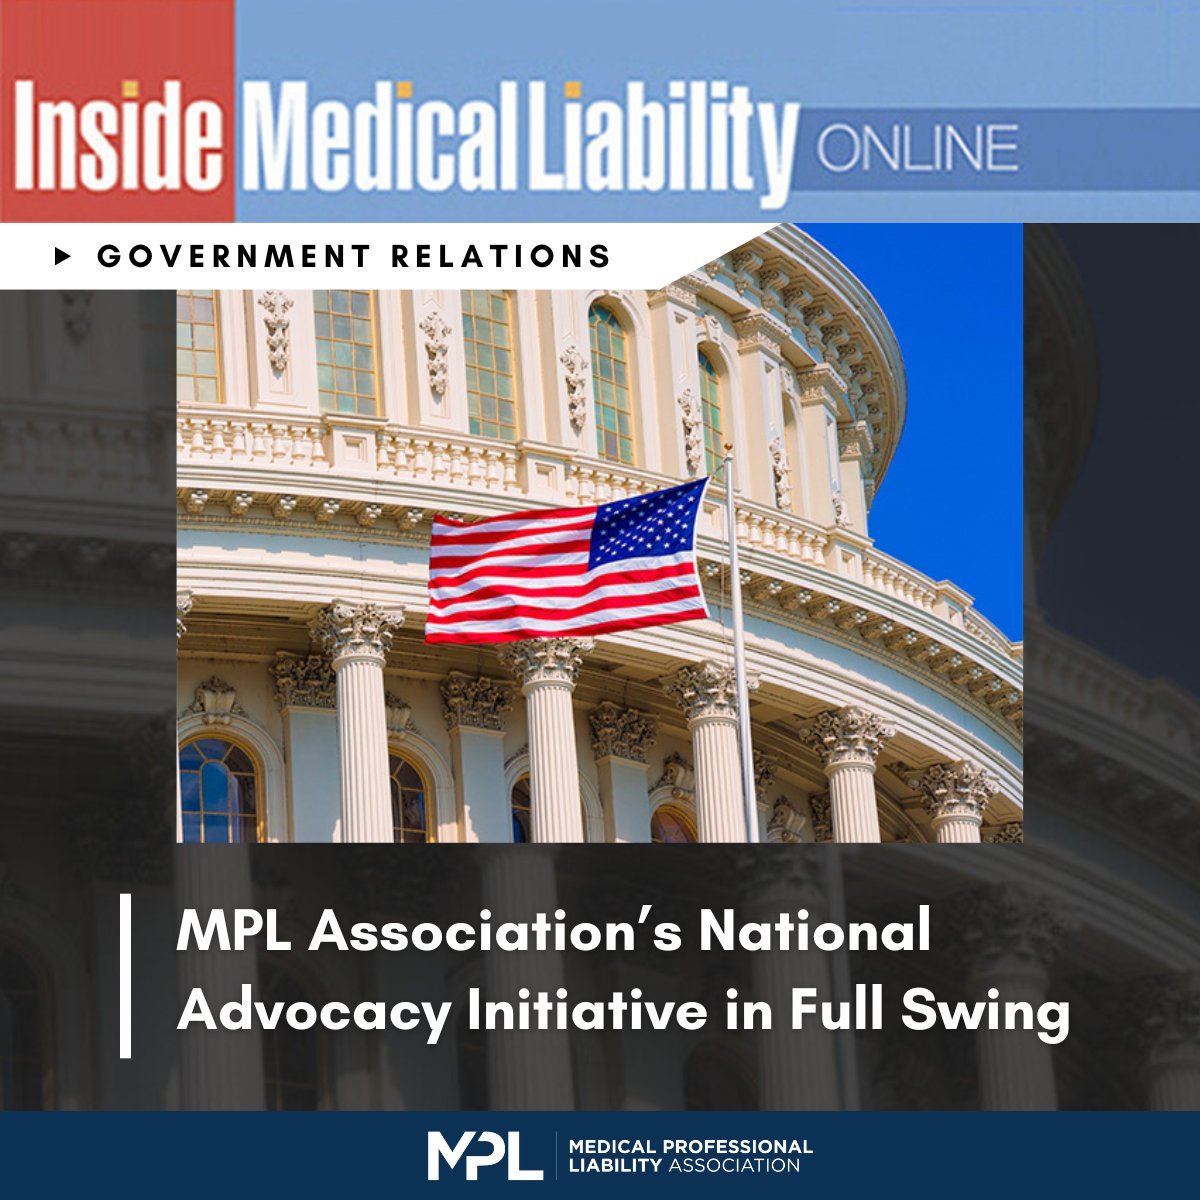 The MPL Association launches the National Advocacy Initiative, which focuses on state policymakers amid growing threats to established reforms. Learn more: bit.ly/3xGTdoj